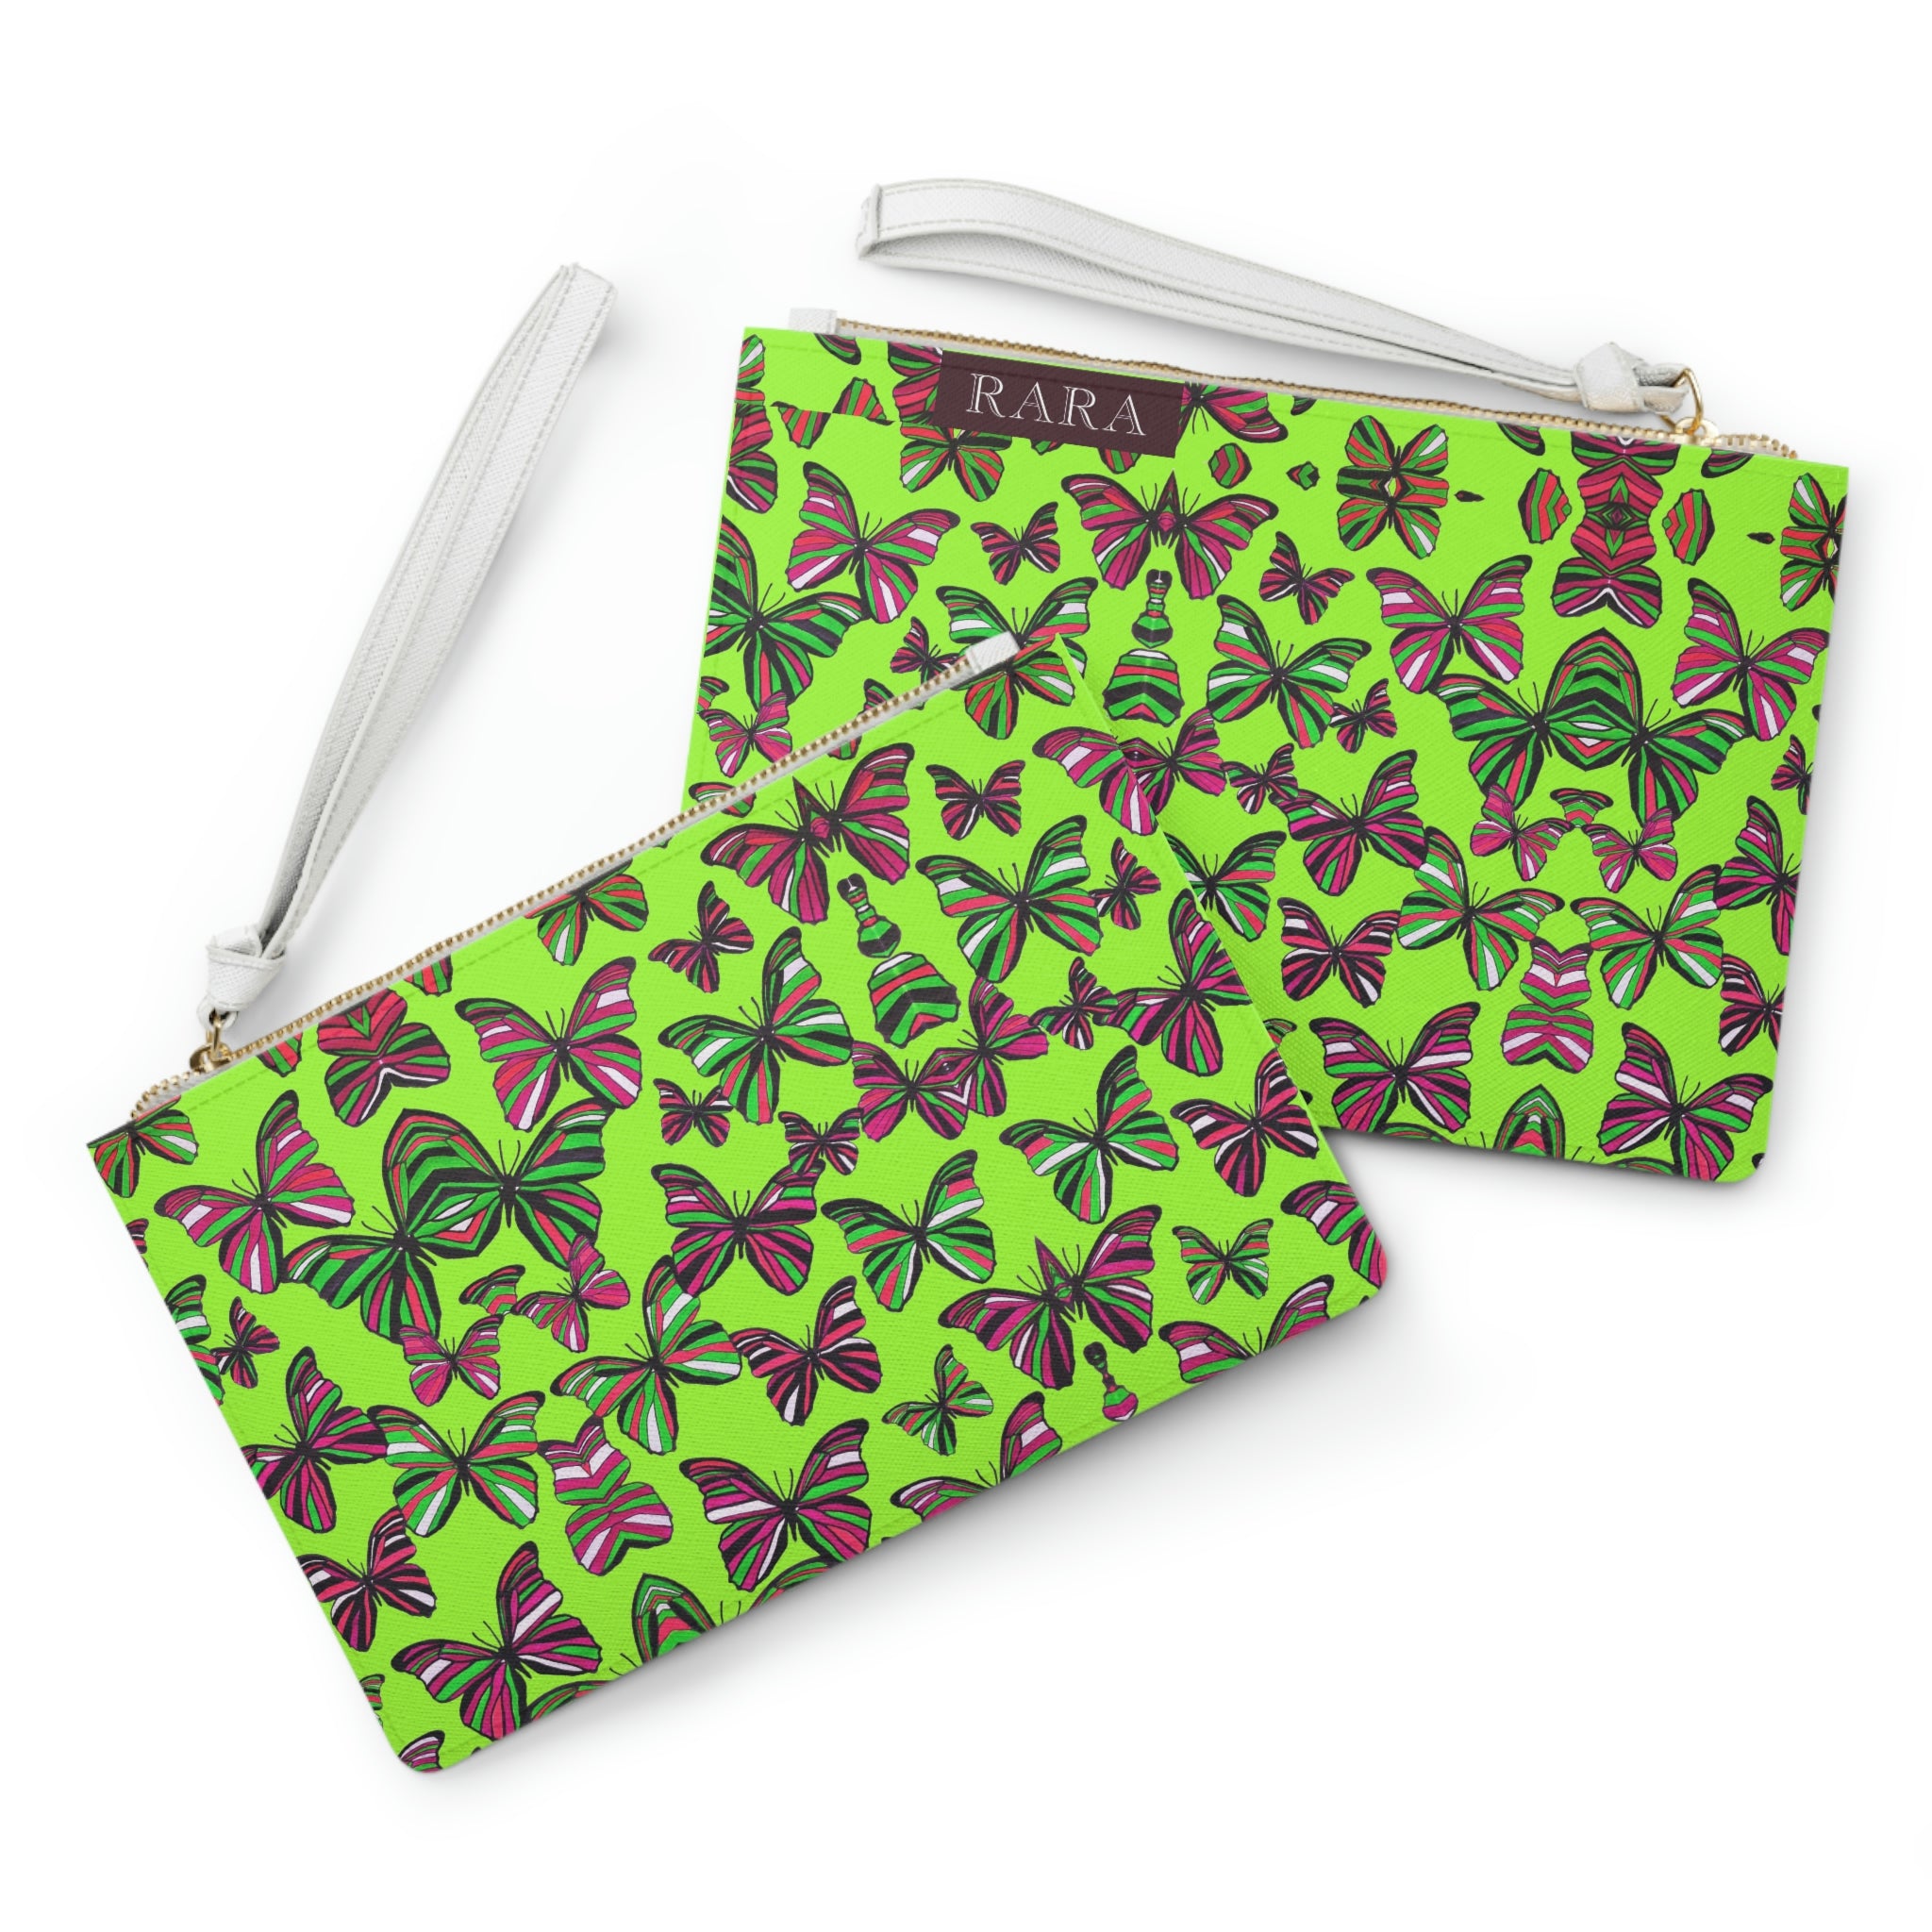 lime green butterfly print clutch bag